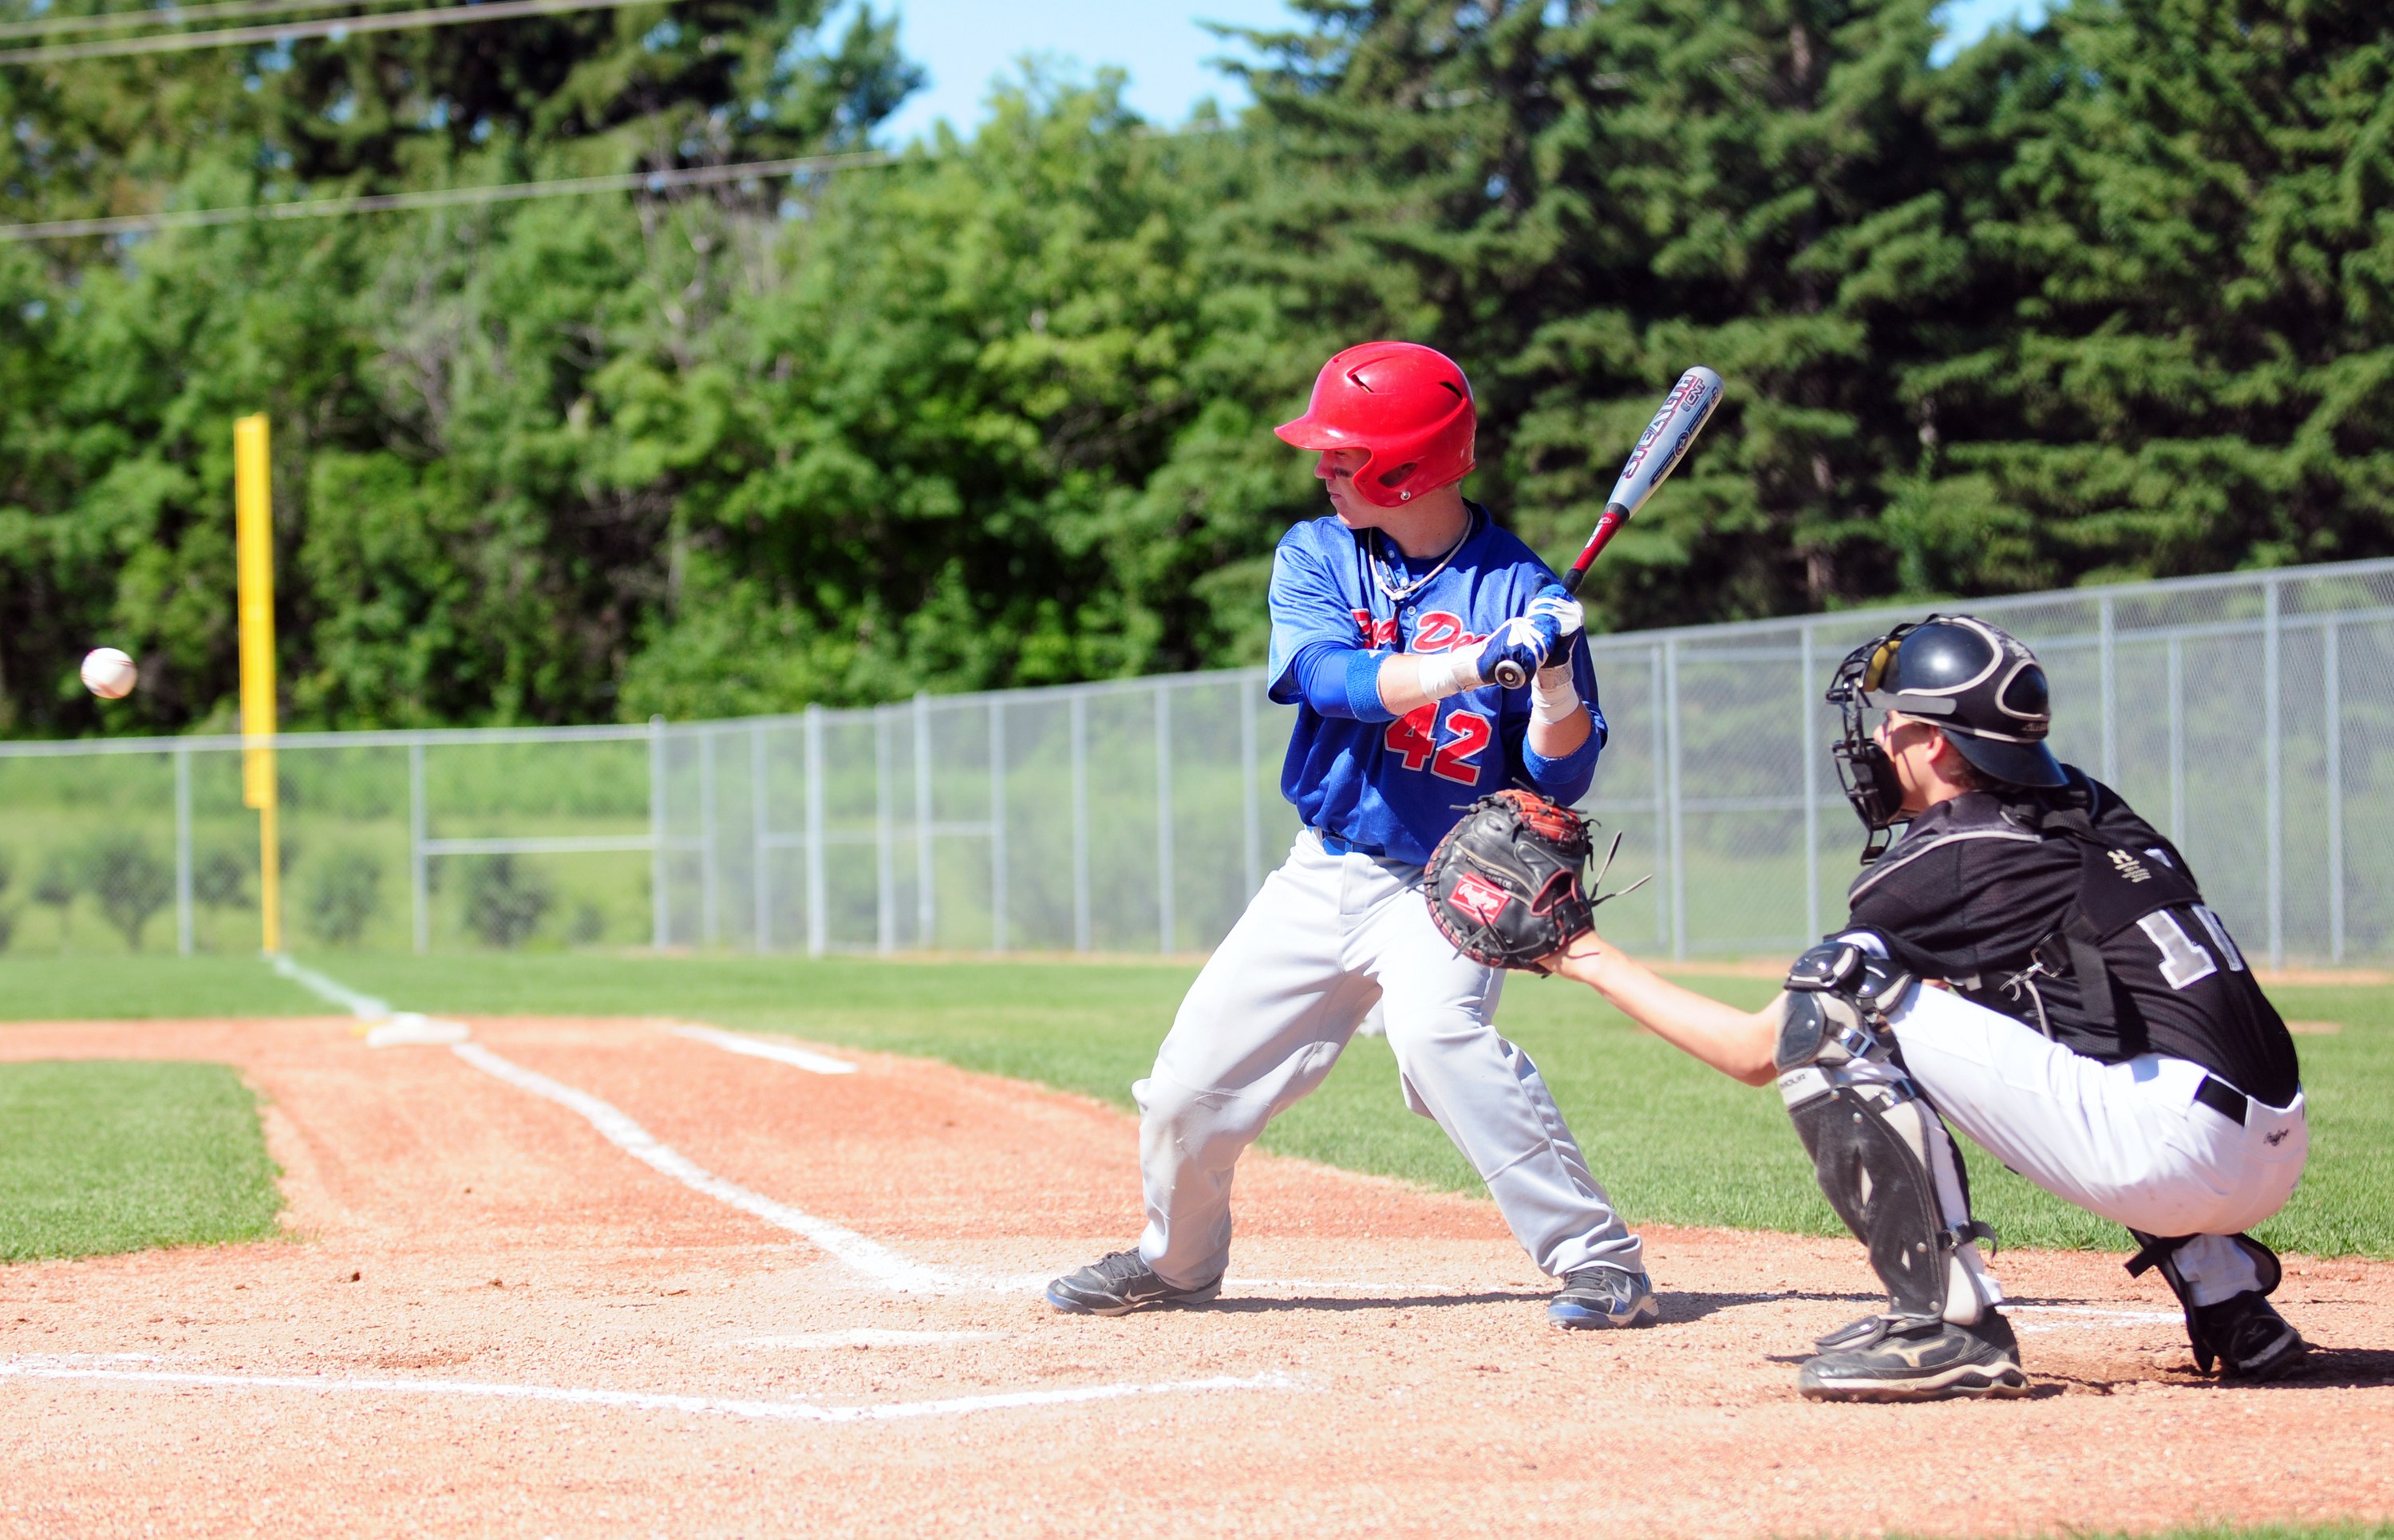 INCOMING- Red Deer Brave Riley Guntrip gets ready to swing as the pitcher throws the ball during minor baseball action this past weekend at Great Chief Park.